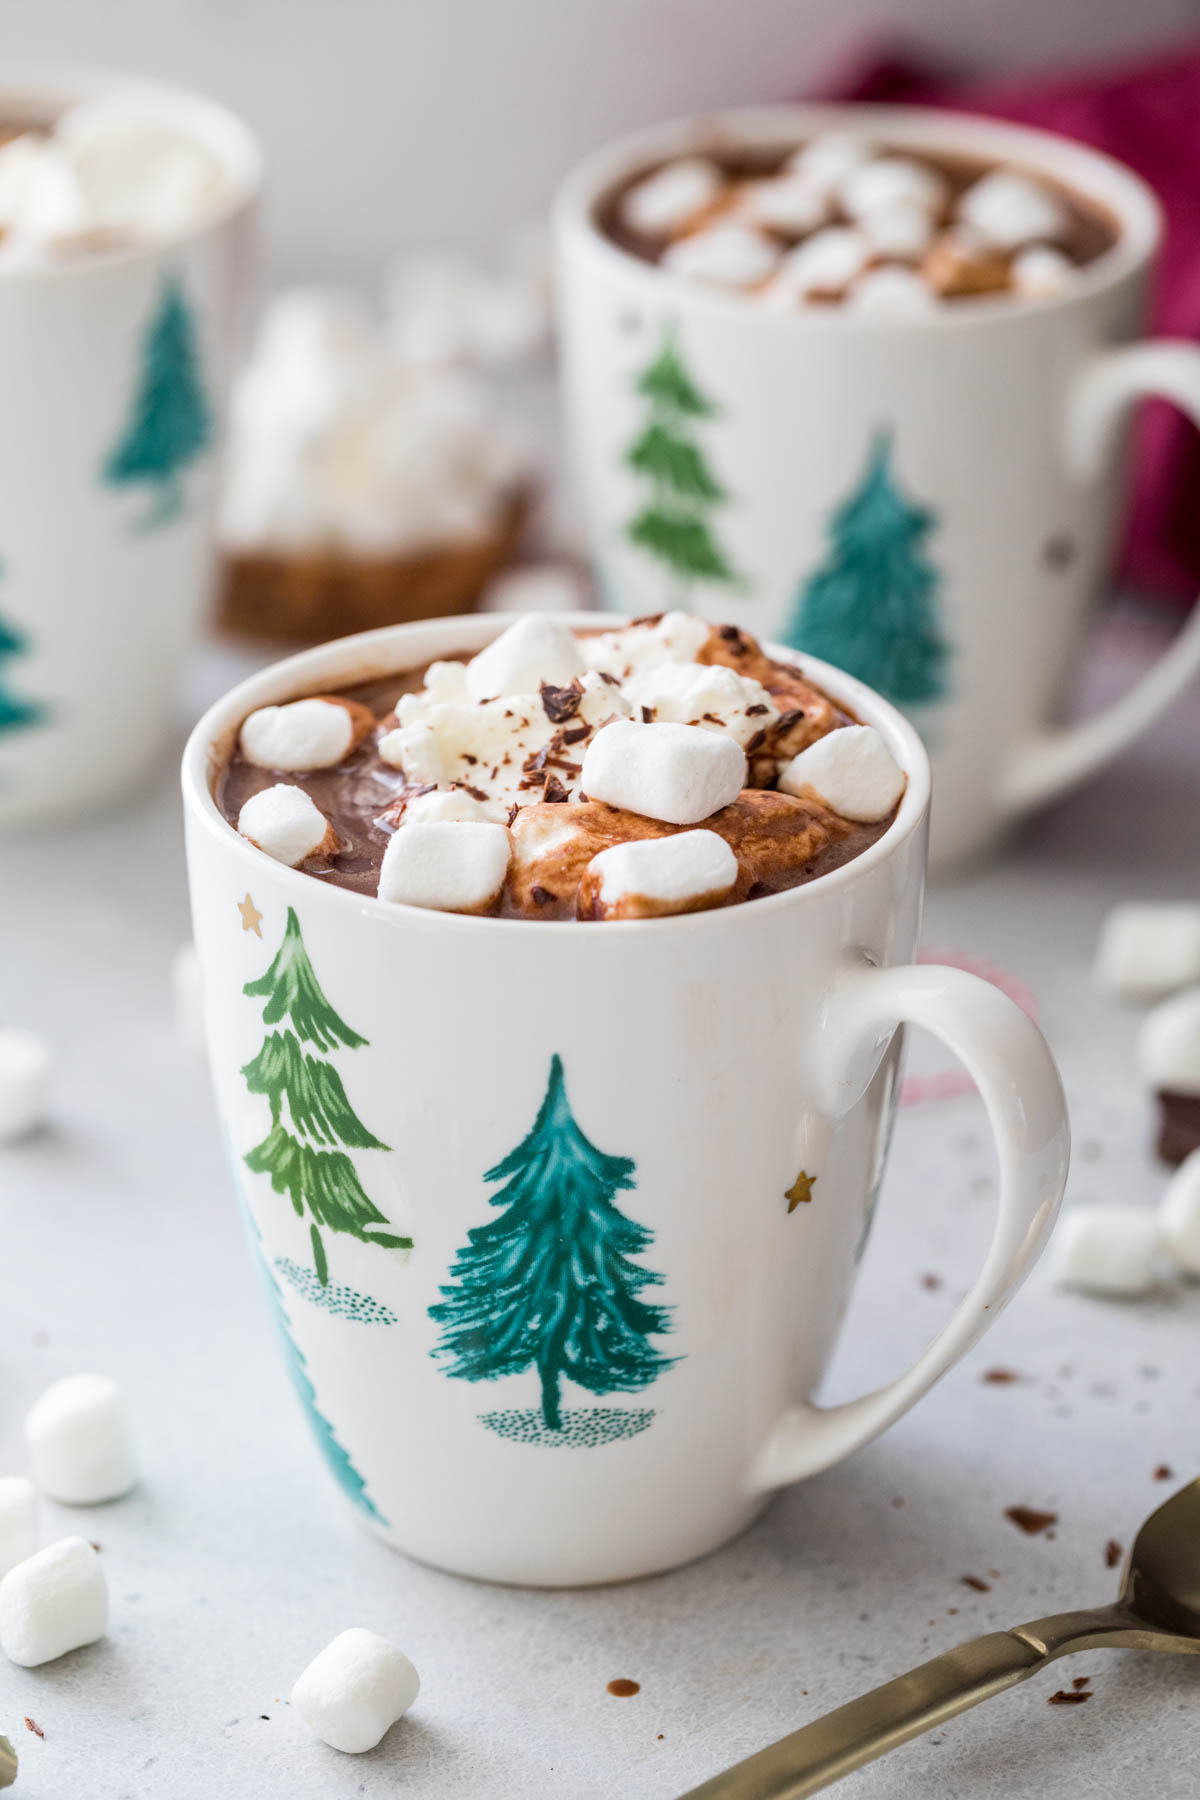 white mugs filled to the brim with hot chocolate topped with whipped cream, marshmallows, and chocolate shavings